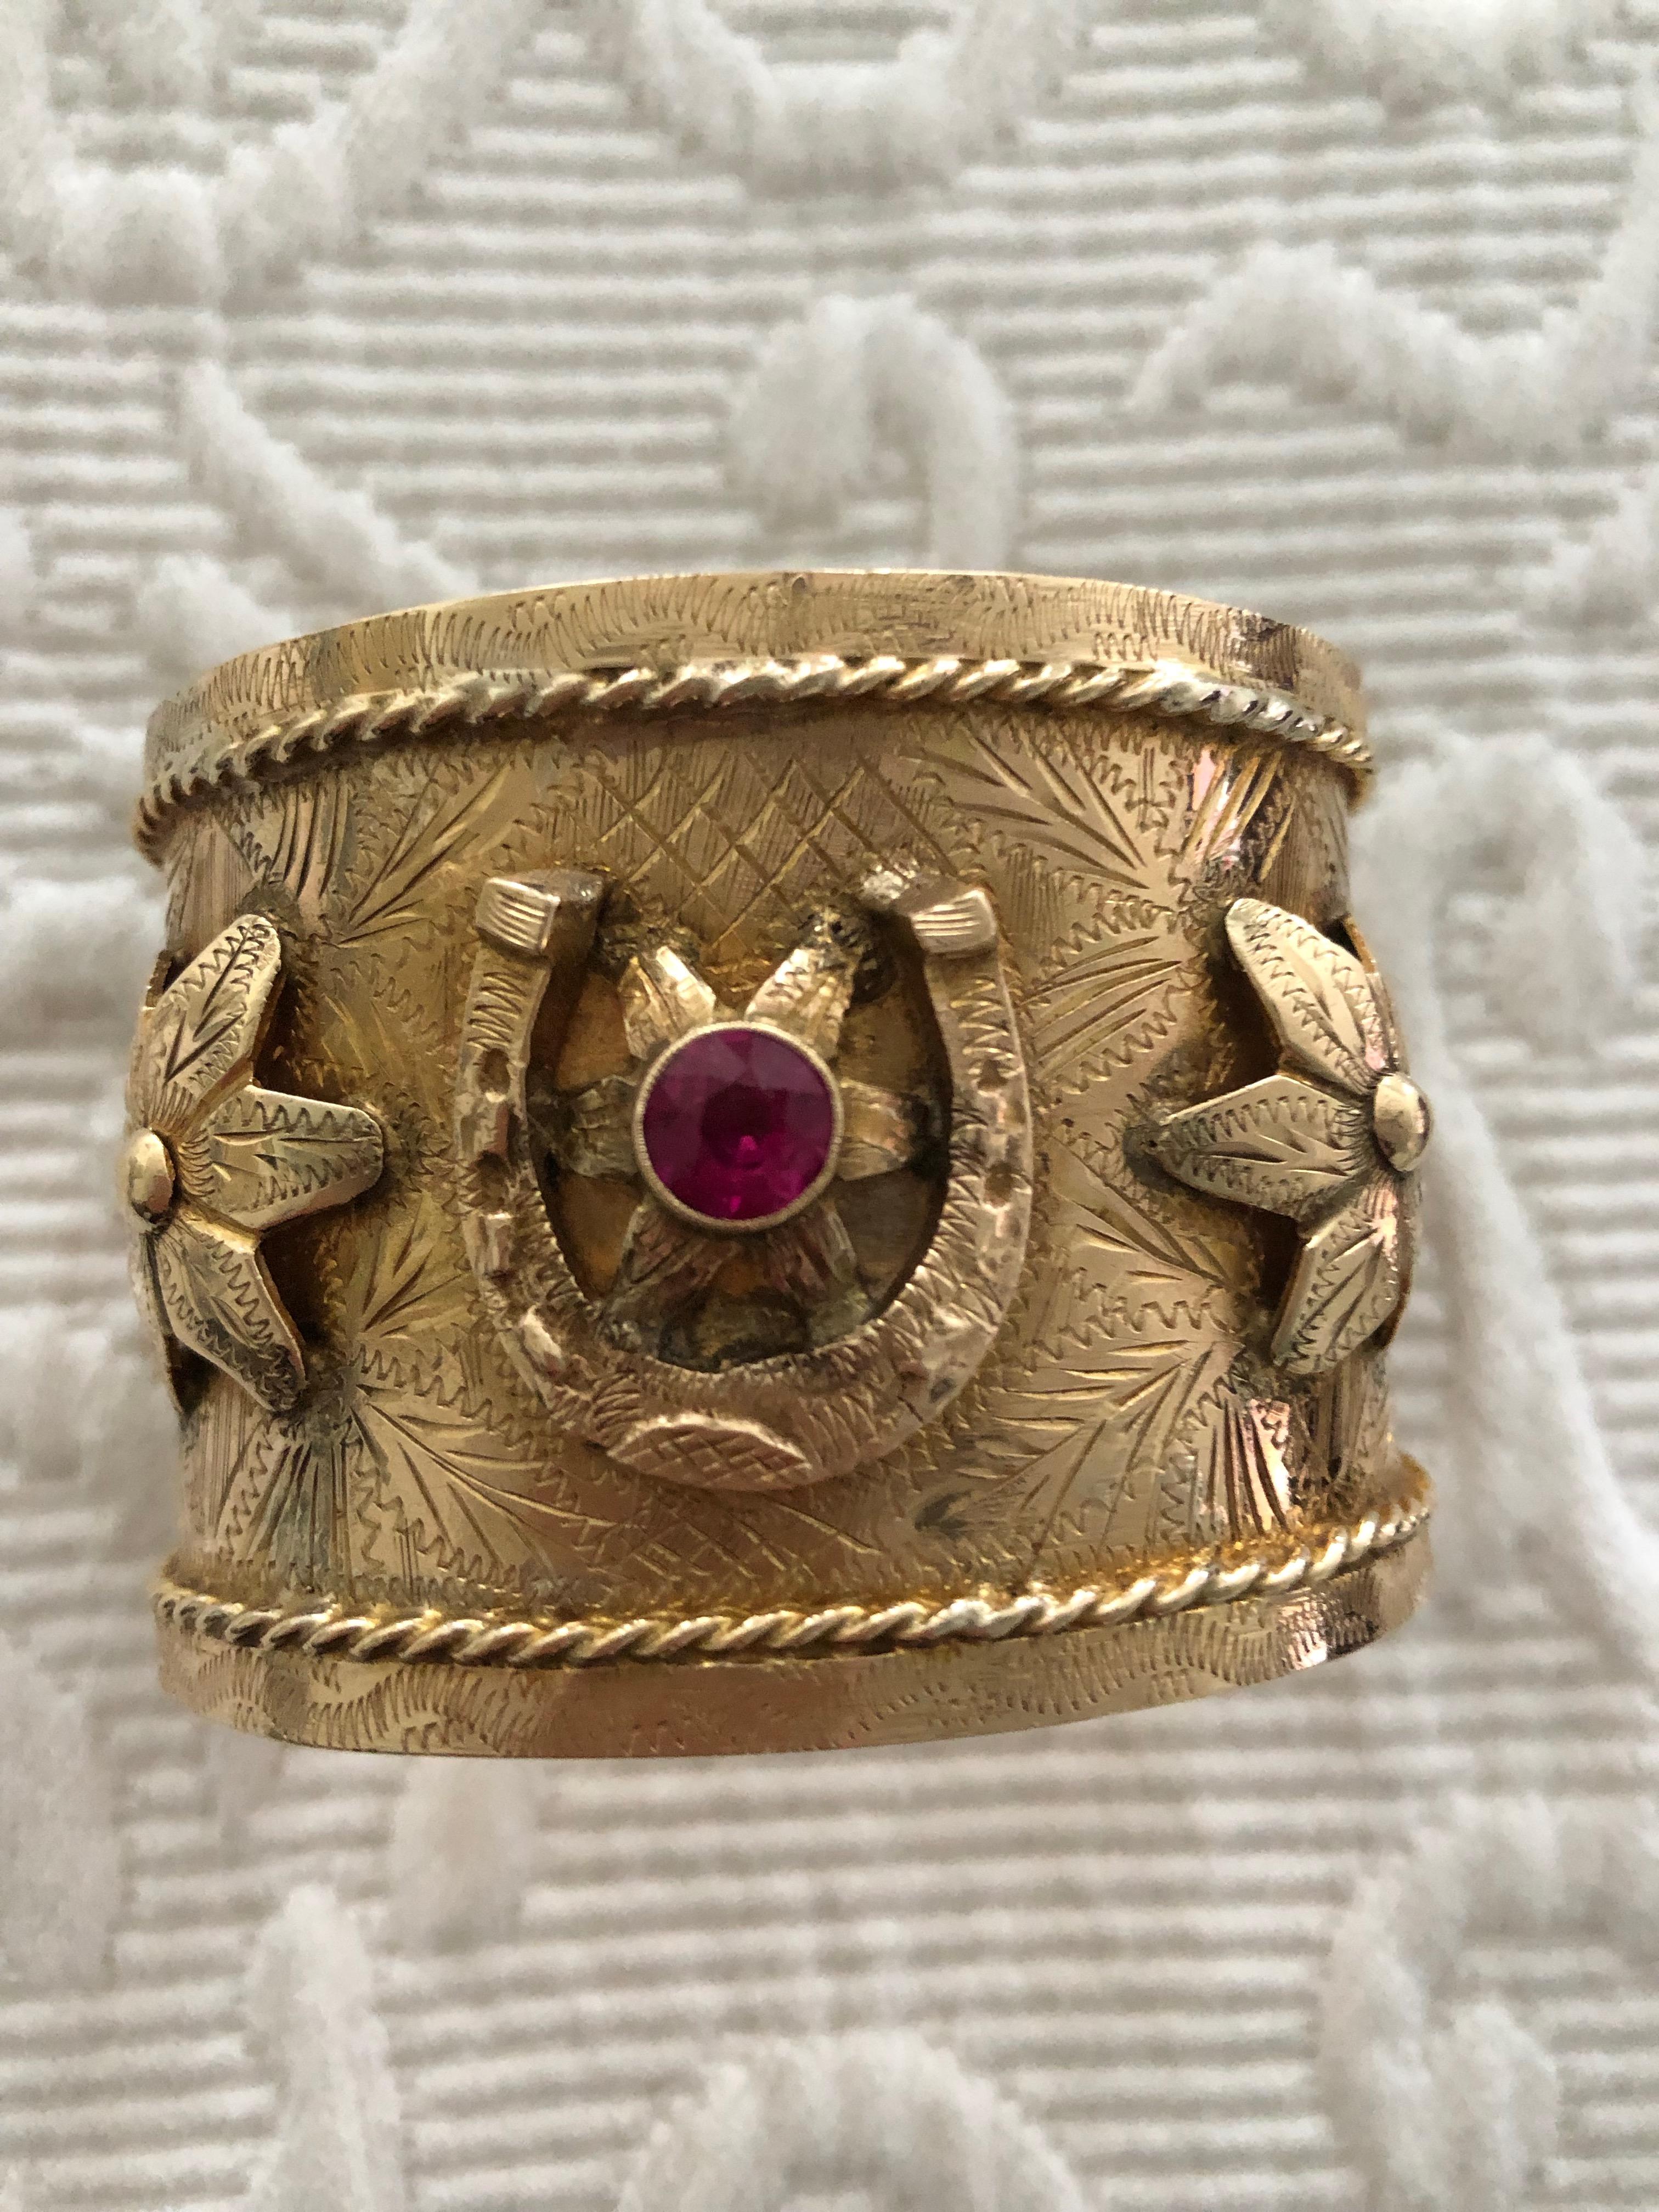 One cuff is rare but a pair is very rare! This pair of gypsy cuff bracelets are in 14 karat gold (I have only seen 14 karat gold) having 5 rosette design, a red rubies  to the centre of each bracelet. These are very rare. During the early 1900s